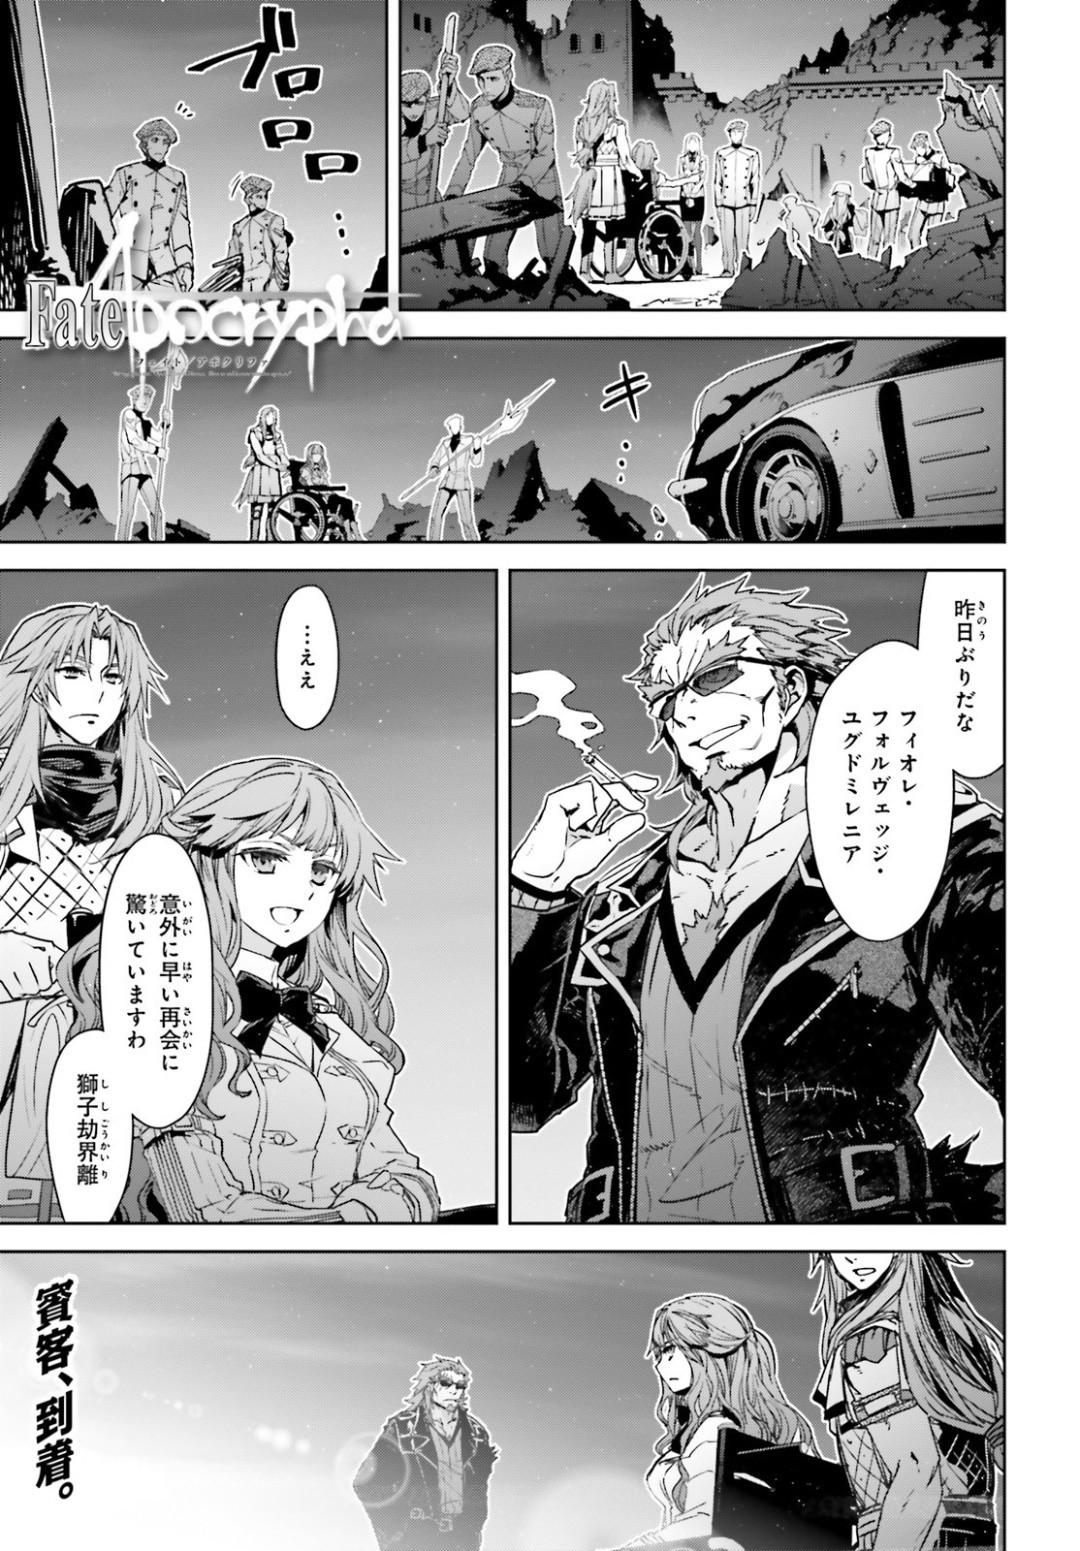 Fate-Apocrypha - Chapter 38 - Page 2